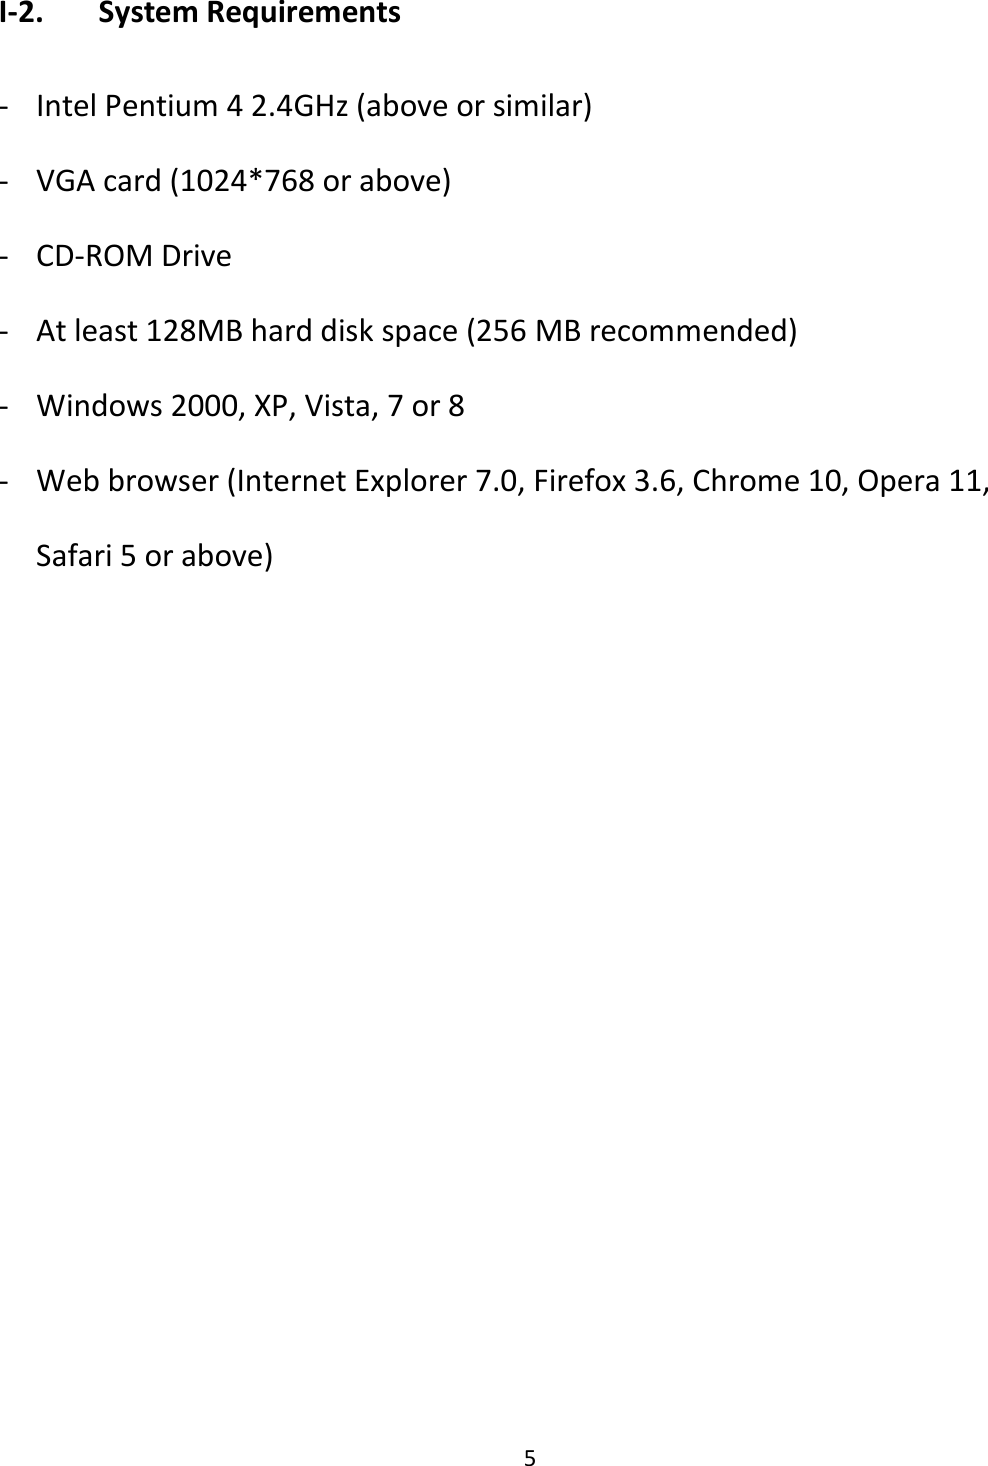 5    I-2.   System Requirements  - Intel Pentium 4 2.4GHz (above or similar) - VGA card (1024*768 or above) - CD-ROM Drive - At least 128MB hard disk space (256 MB recommended) - Windows 2000, XP, Vista, 7 or 8 - Web browser (Internet Explorer 7.0, Firefox 3.6, Chrome 10, Opera 11, Safari 5 or above)  